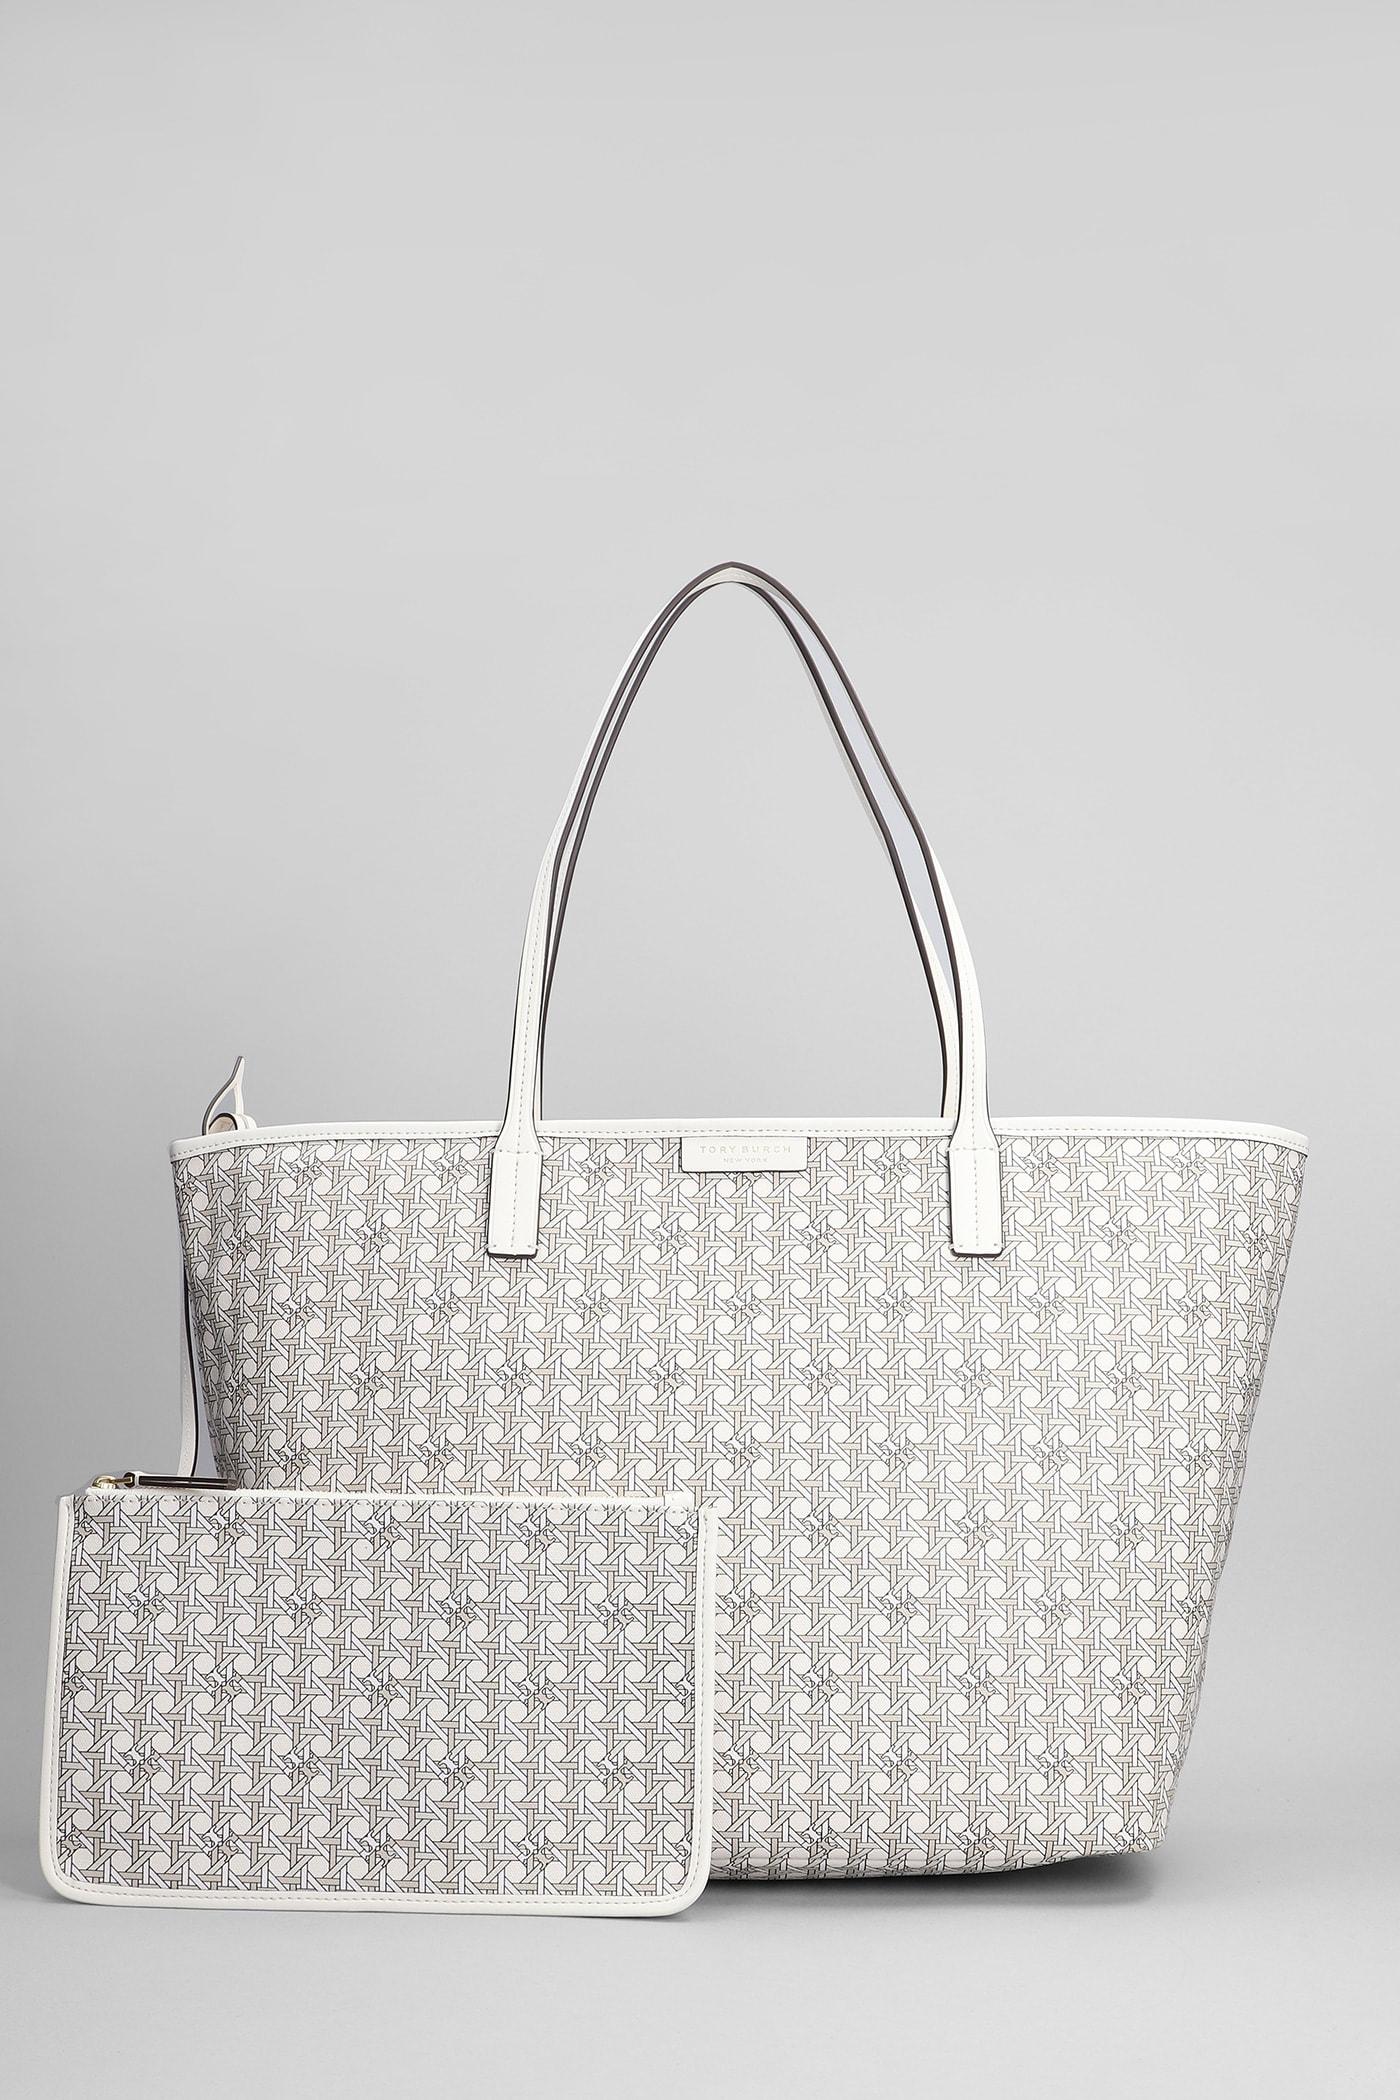 Tory Burch Ever Ready Tote In White Cotton in Gray | Lyst